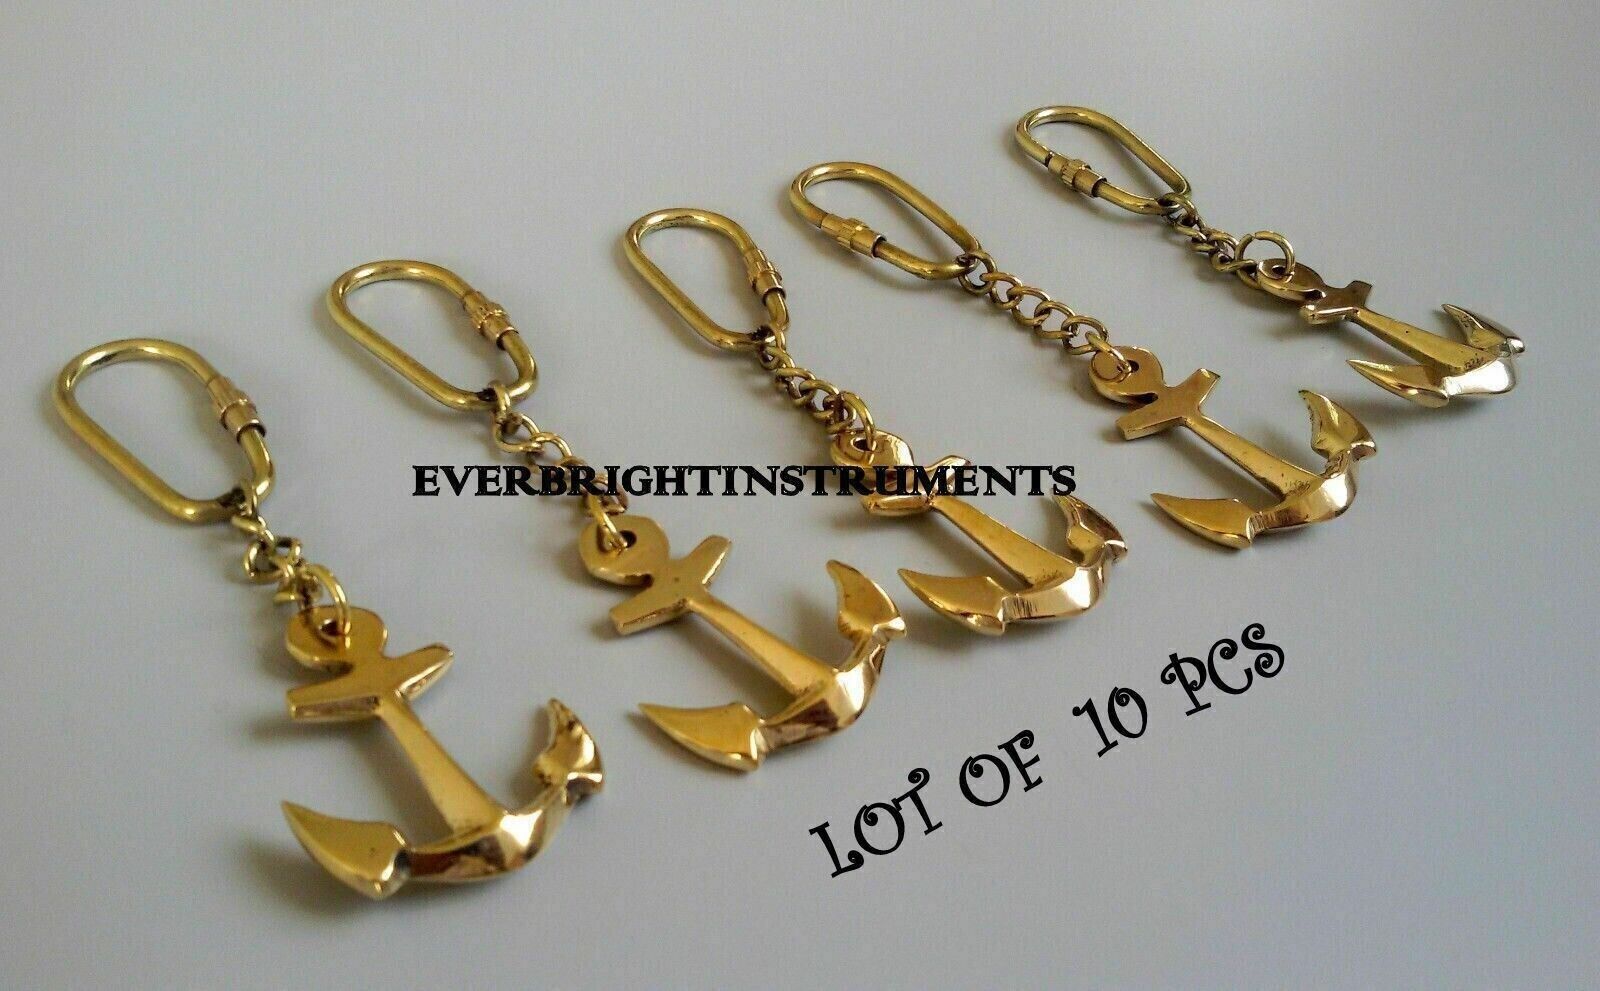 Anchor Key Chain Lot of 10 PCs Handmade Vintage Brass Anchor key ring for gift